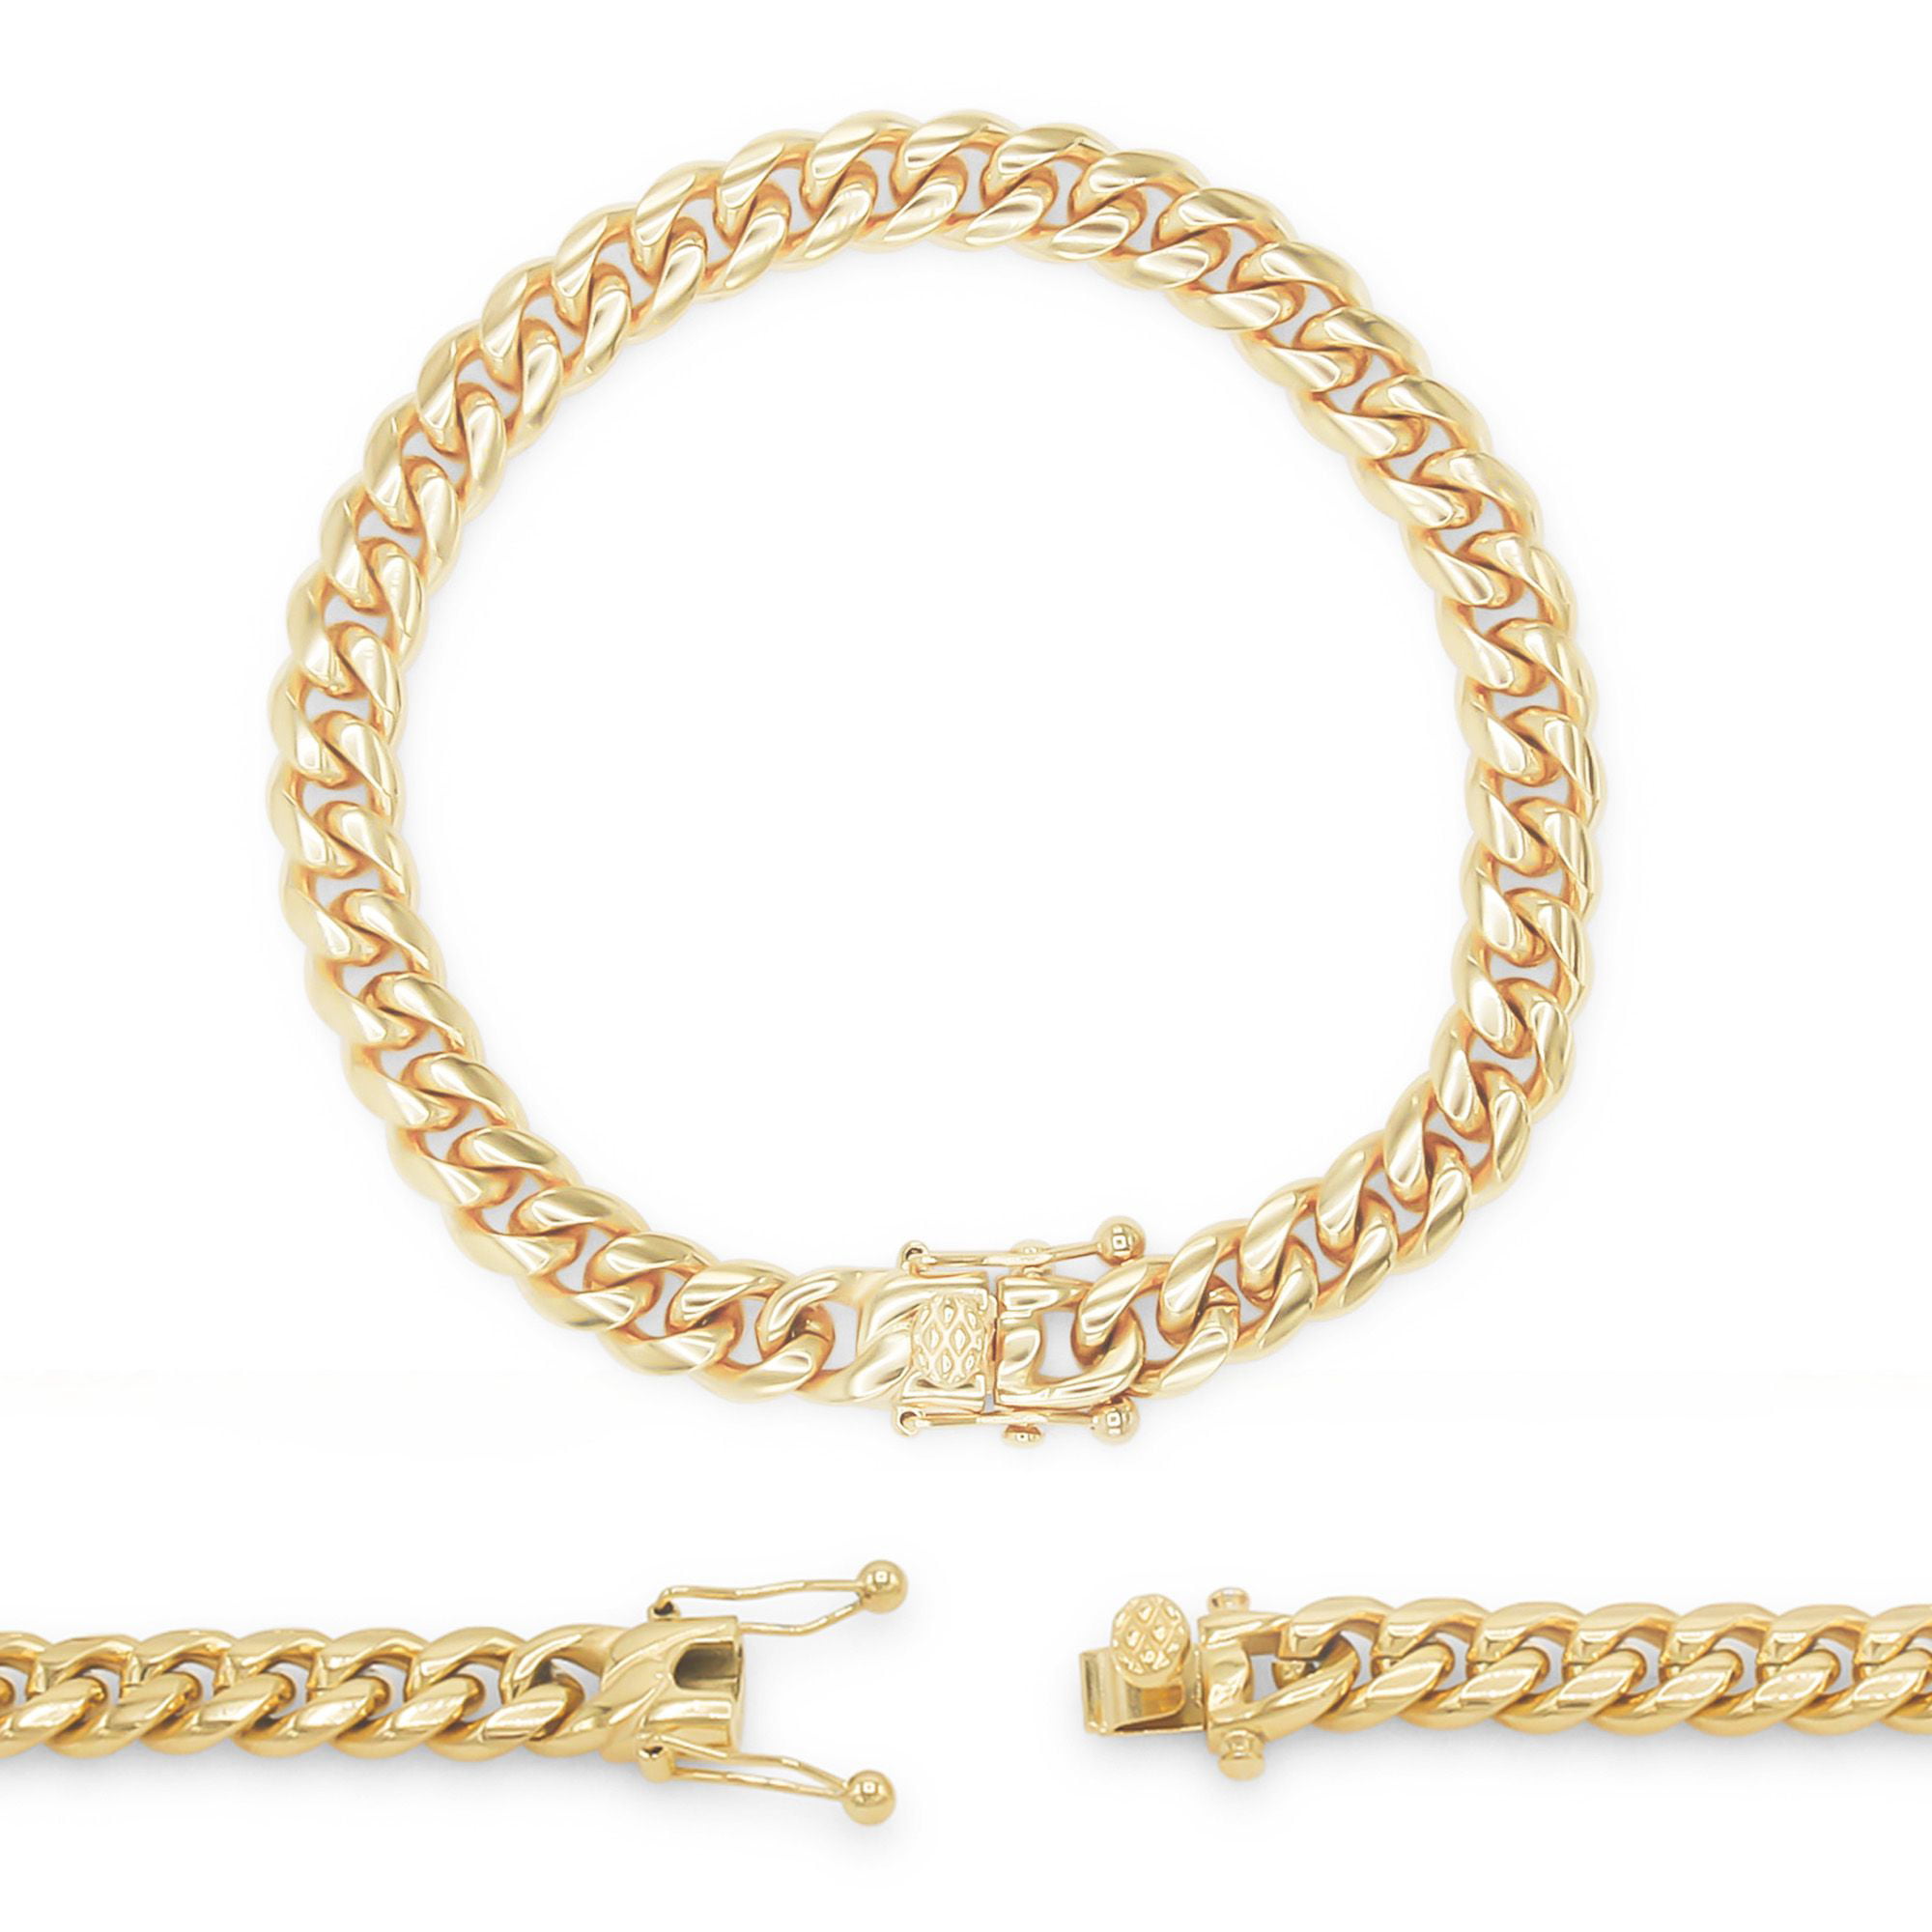 Men's Bracelet Curb Chain 18k Yellow Gold Filled 8" Link Fashion Jewelry 10mm 